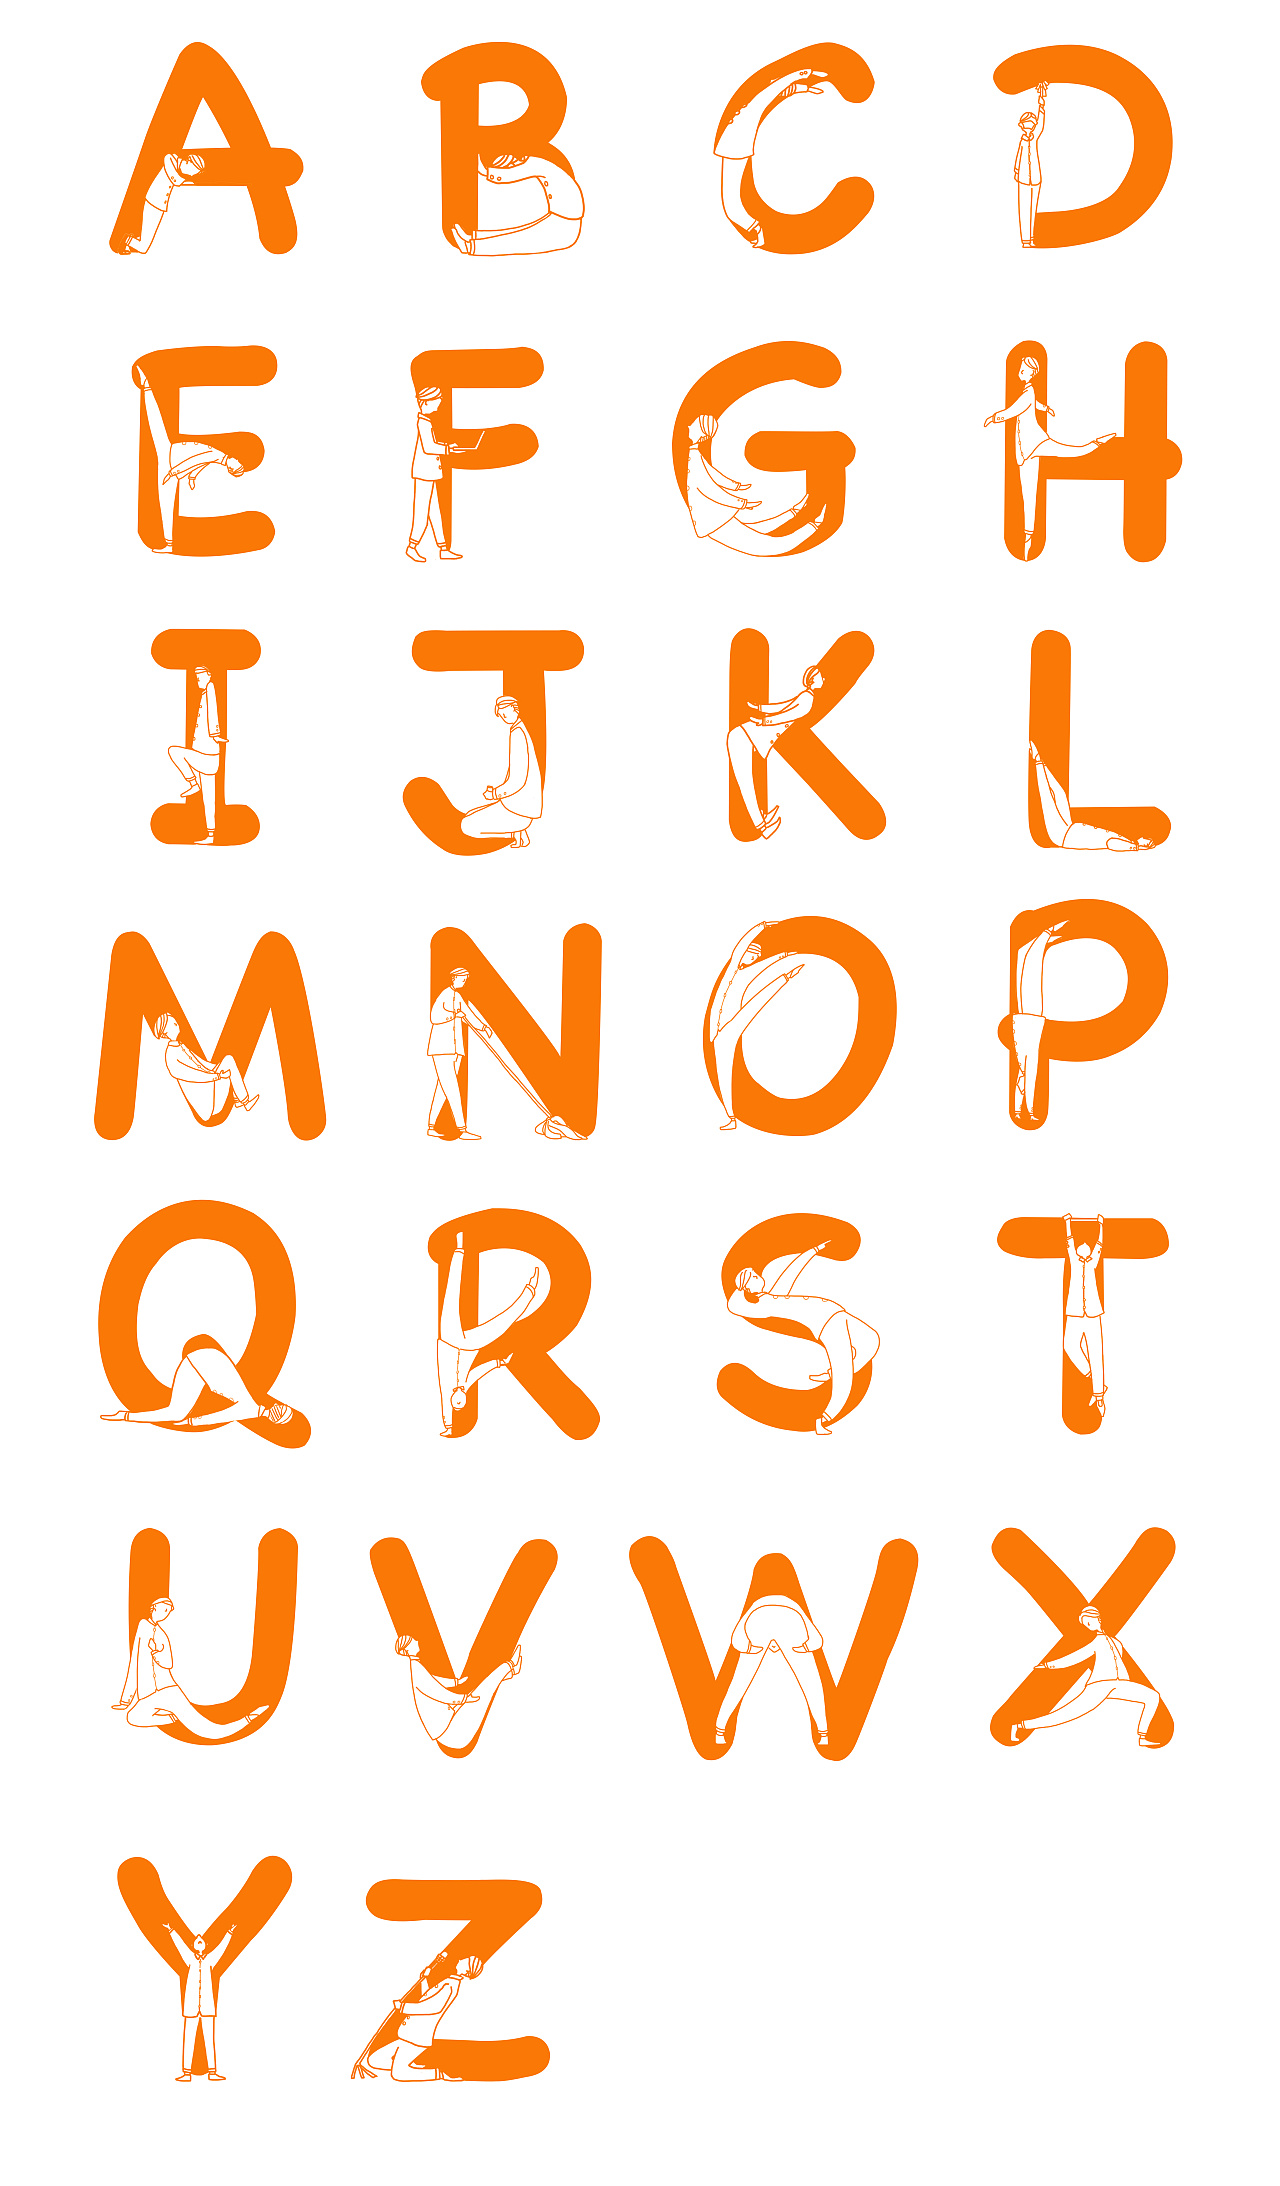 A group of fonts that combine the human body with English letters were designed on a whim.